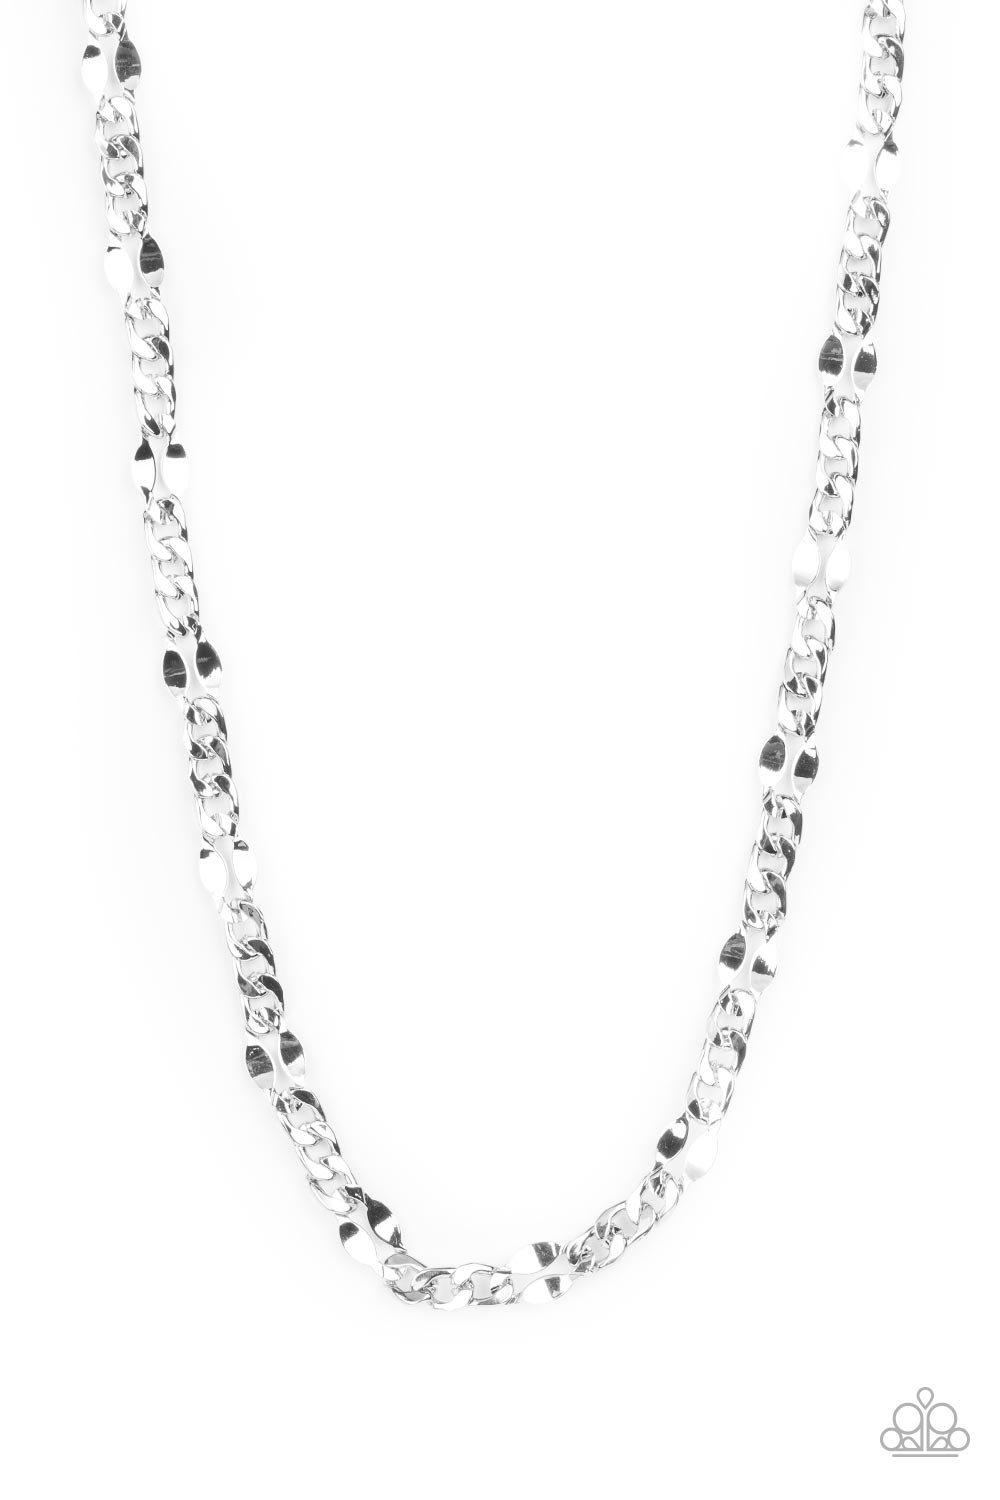 G.O.A.T SILVER-NECKLACE